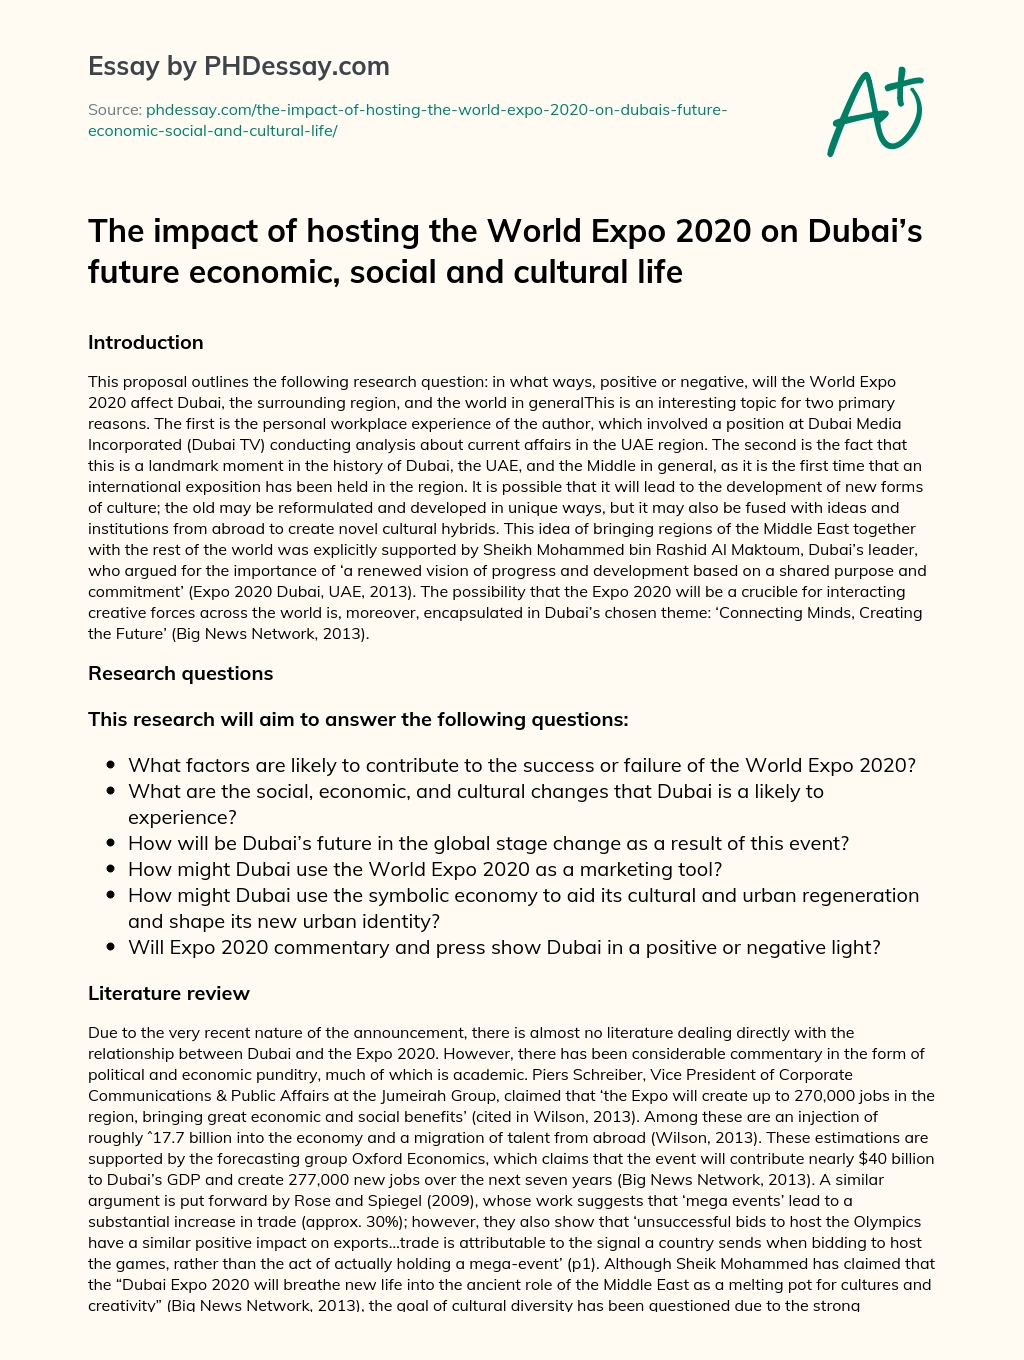 The impact of hosting the World Expo 2020 on Dubai’s future economic, social and cultural life essay